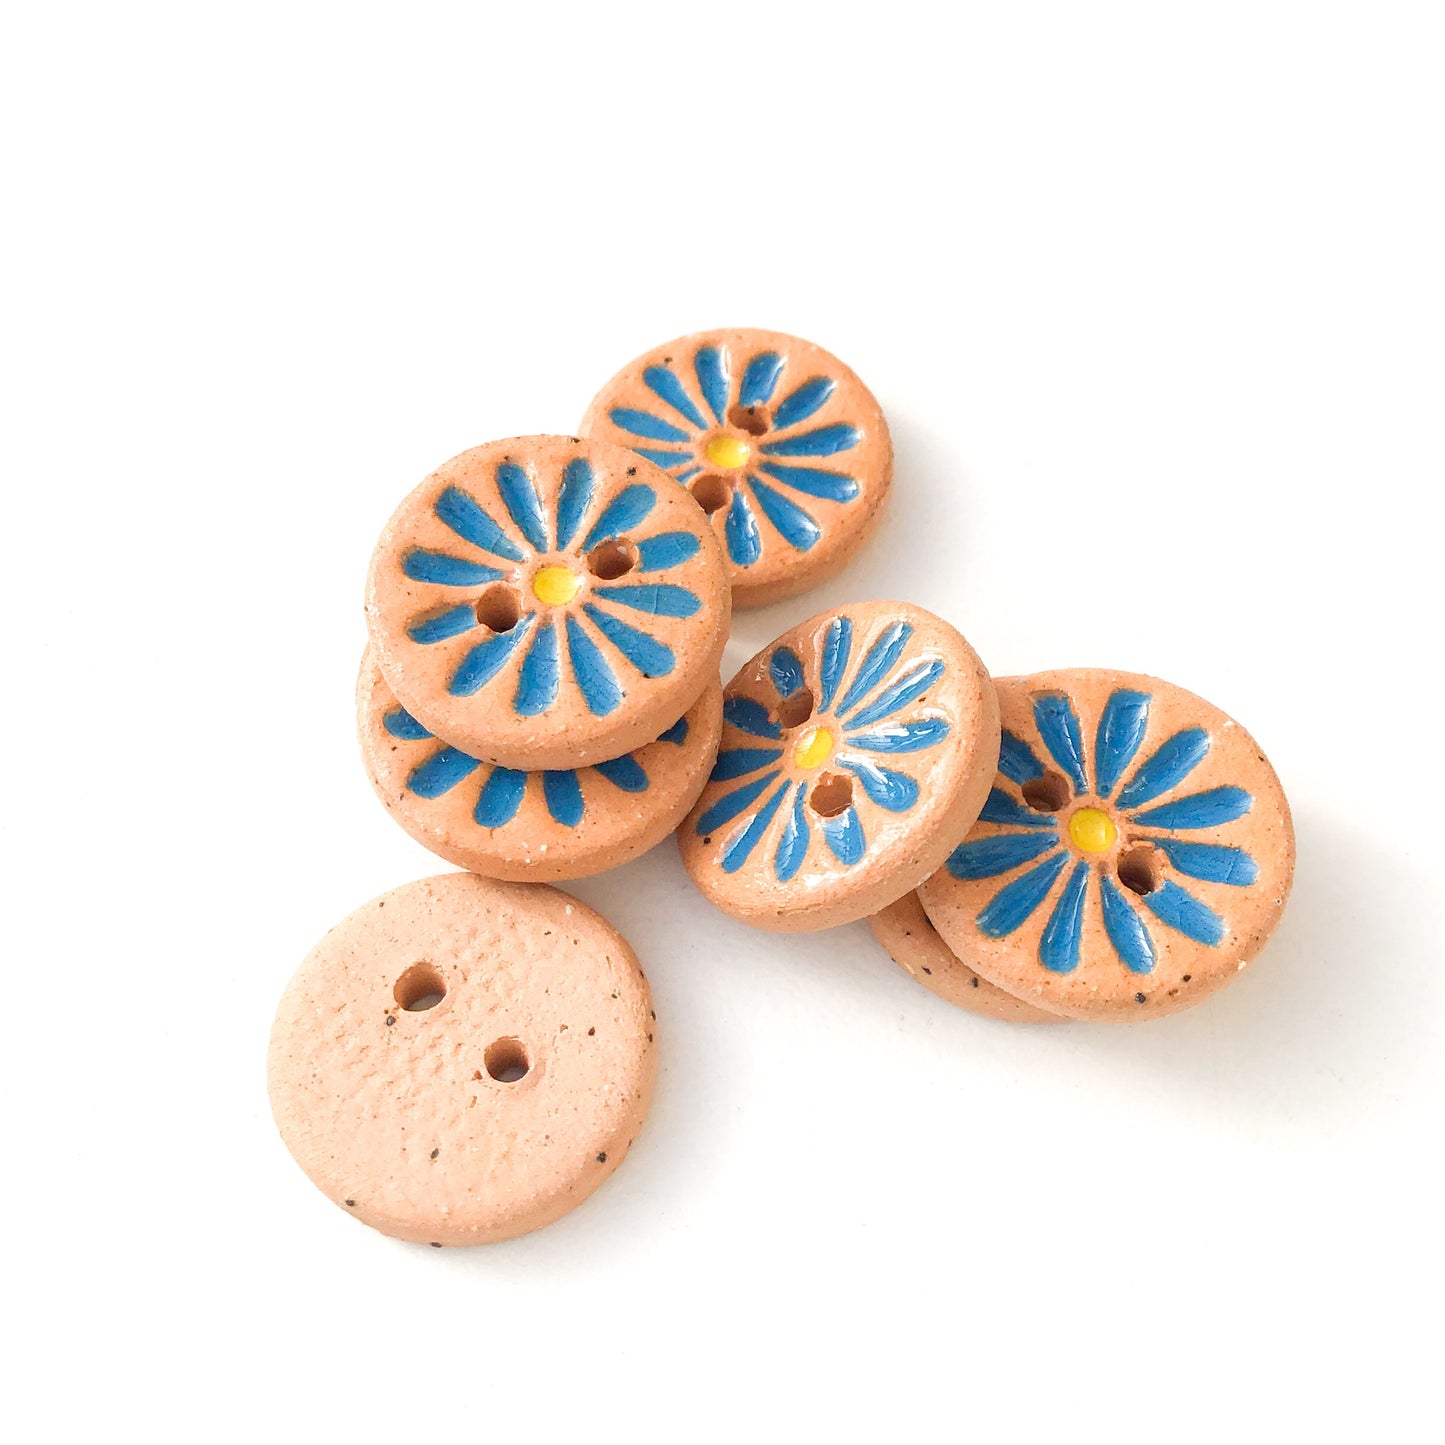 Bright Blue Daisy Buttons on Brown Clay - Ceramic Flower Buttons - 9/16" - 8 Pack (ws-12)